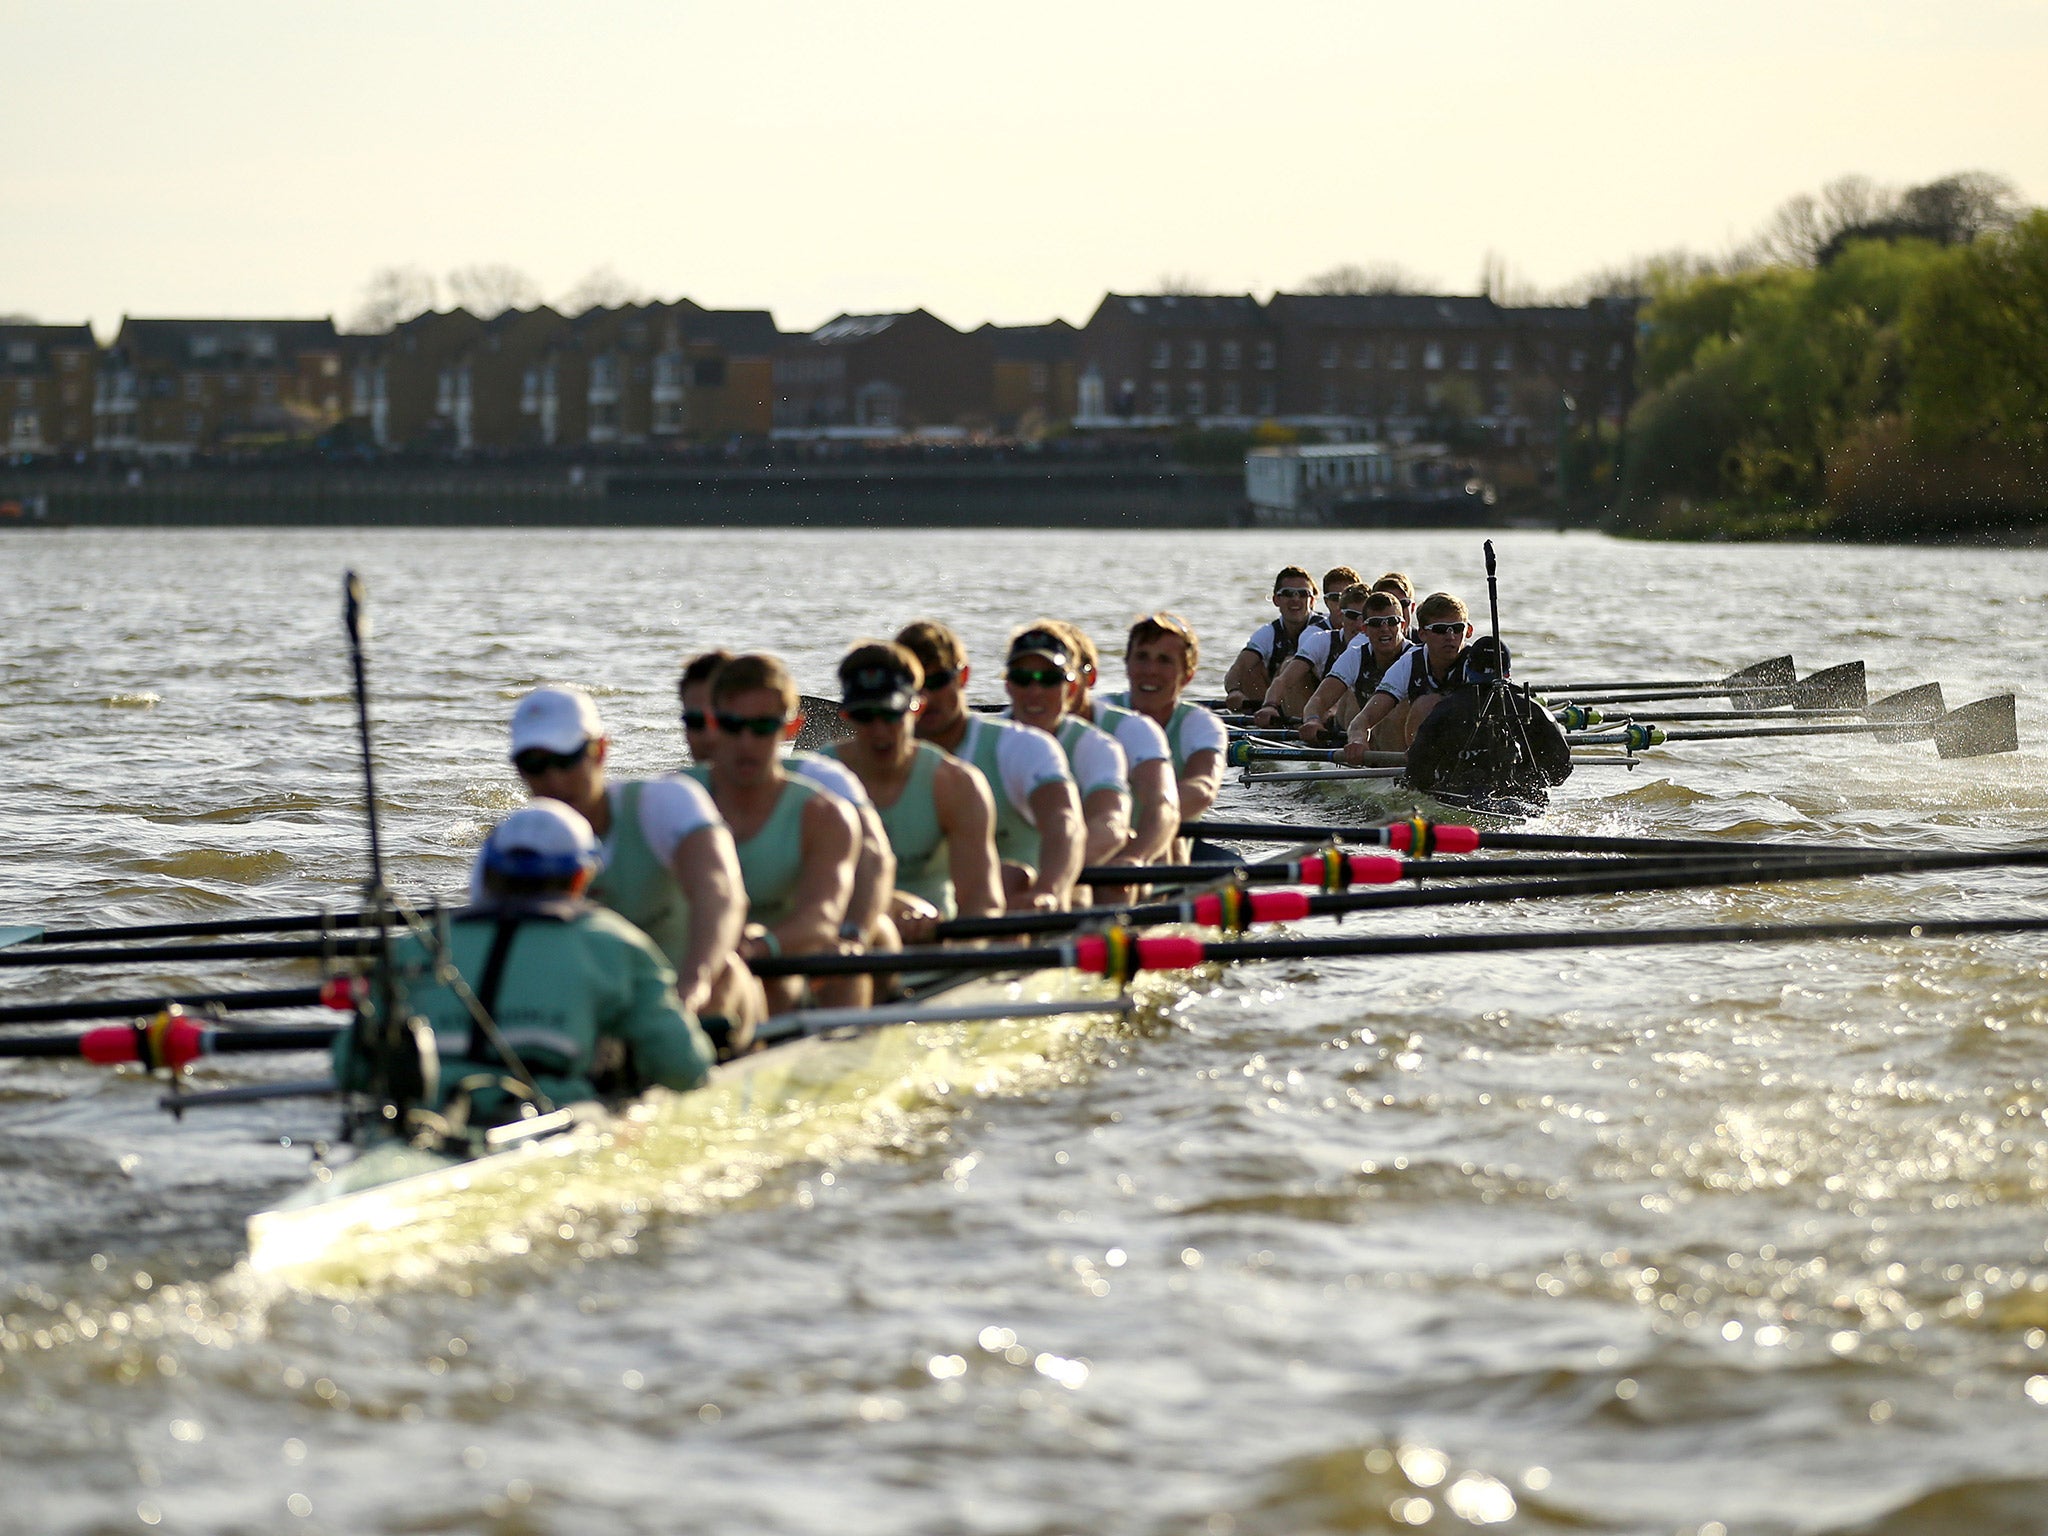 The 2016 Boat Race takes place on Sunday 27 March